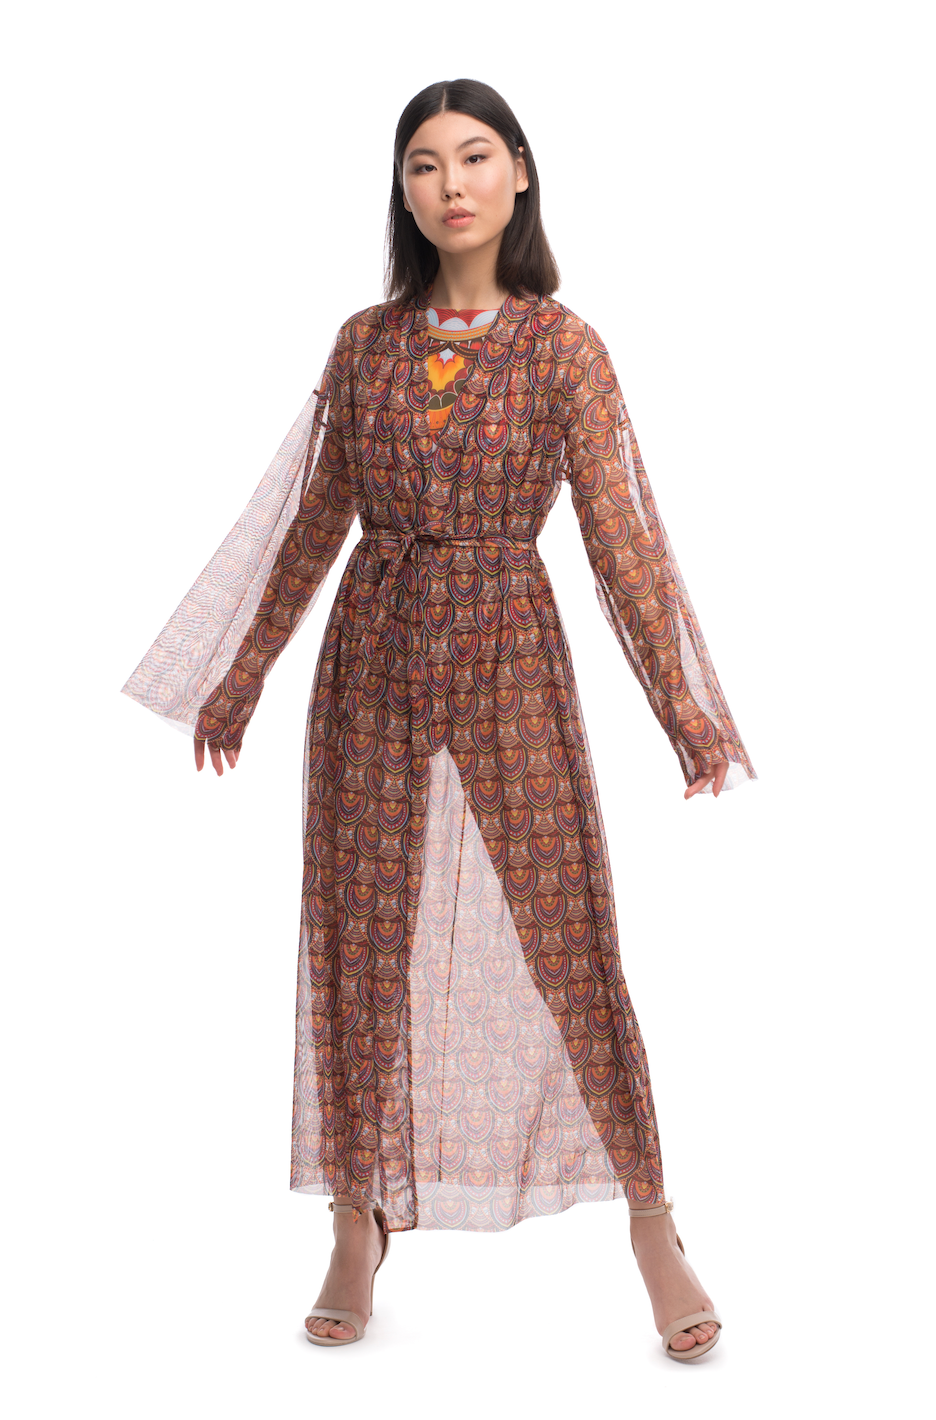 This file provides a concise overview of a sustainable smart swimwear product: the Africa print beach robe. With SPF 15 protection and tan-without-tan-lines technology, it's a stylish choice for sun safety